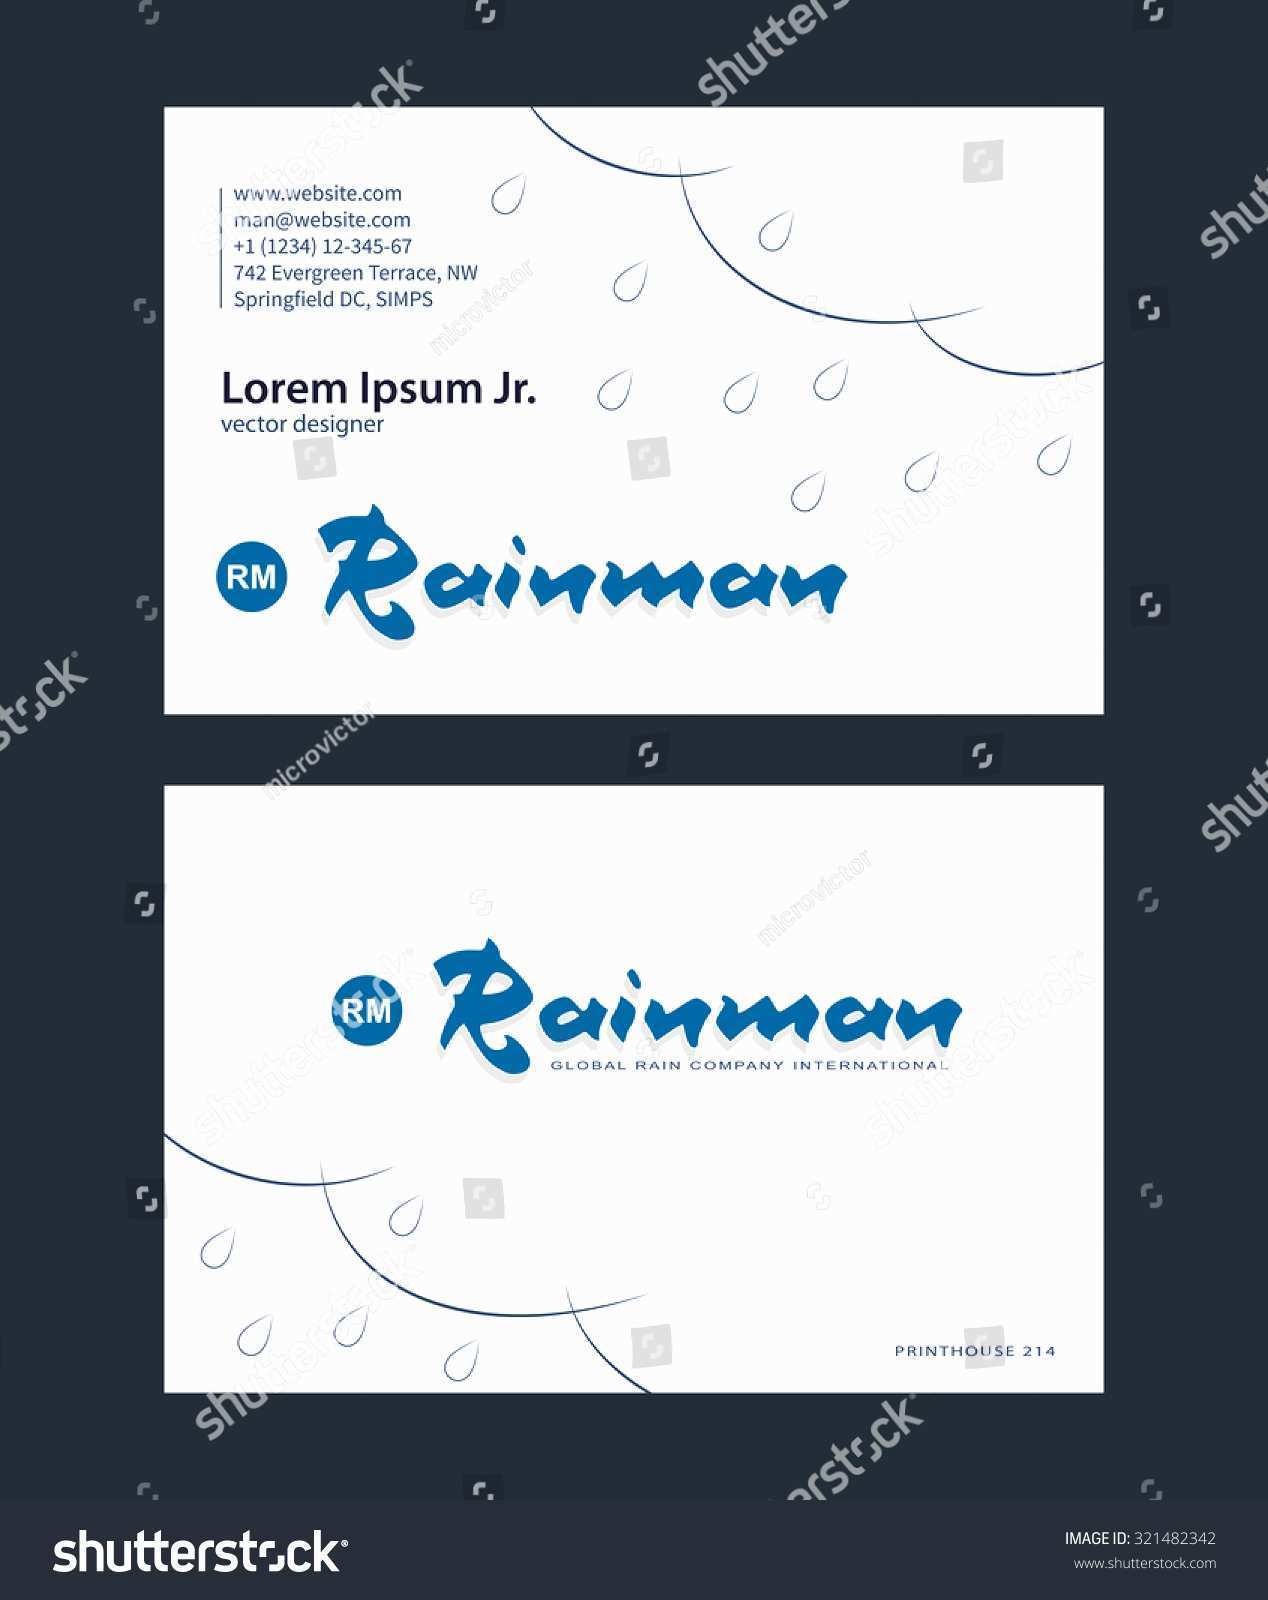 38 Adding Business Card Template 85Mm X 54Mm Now with Business Card Template 85Mm X 54Mm